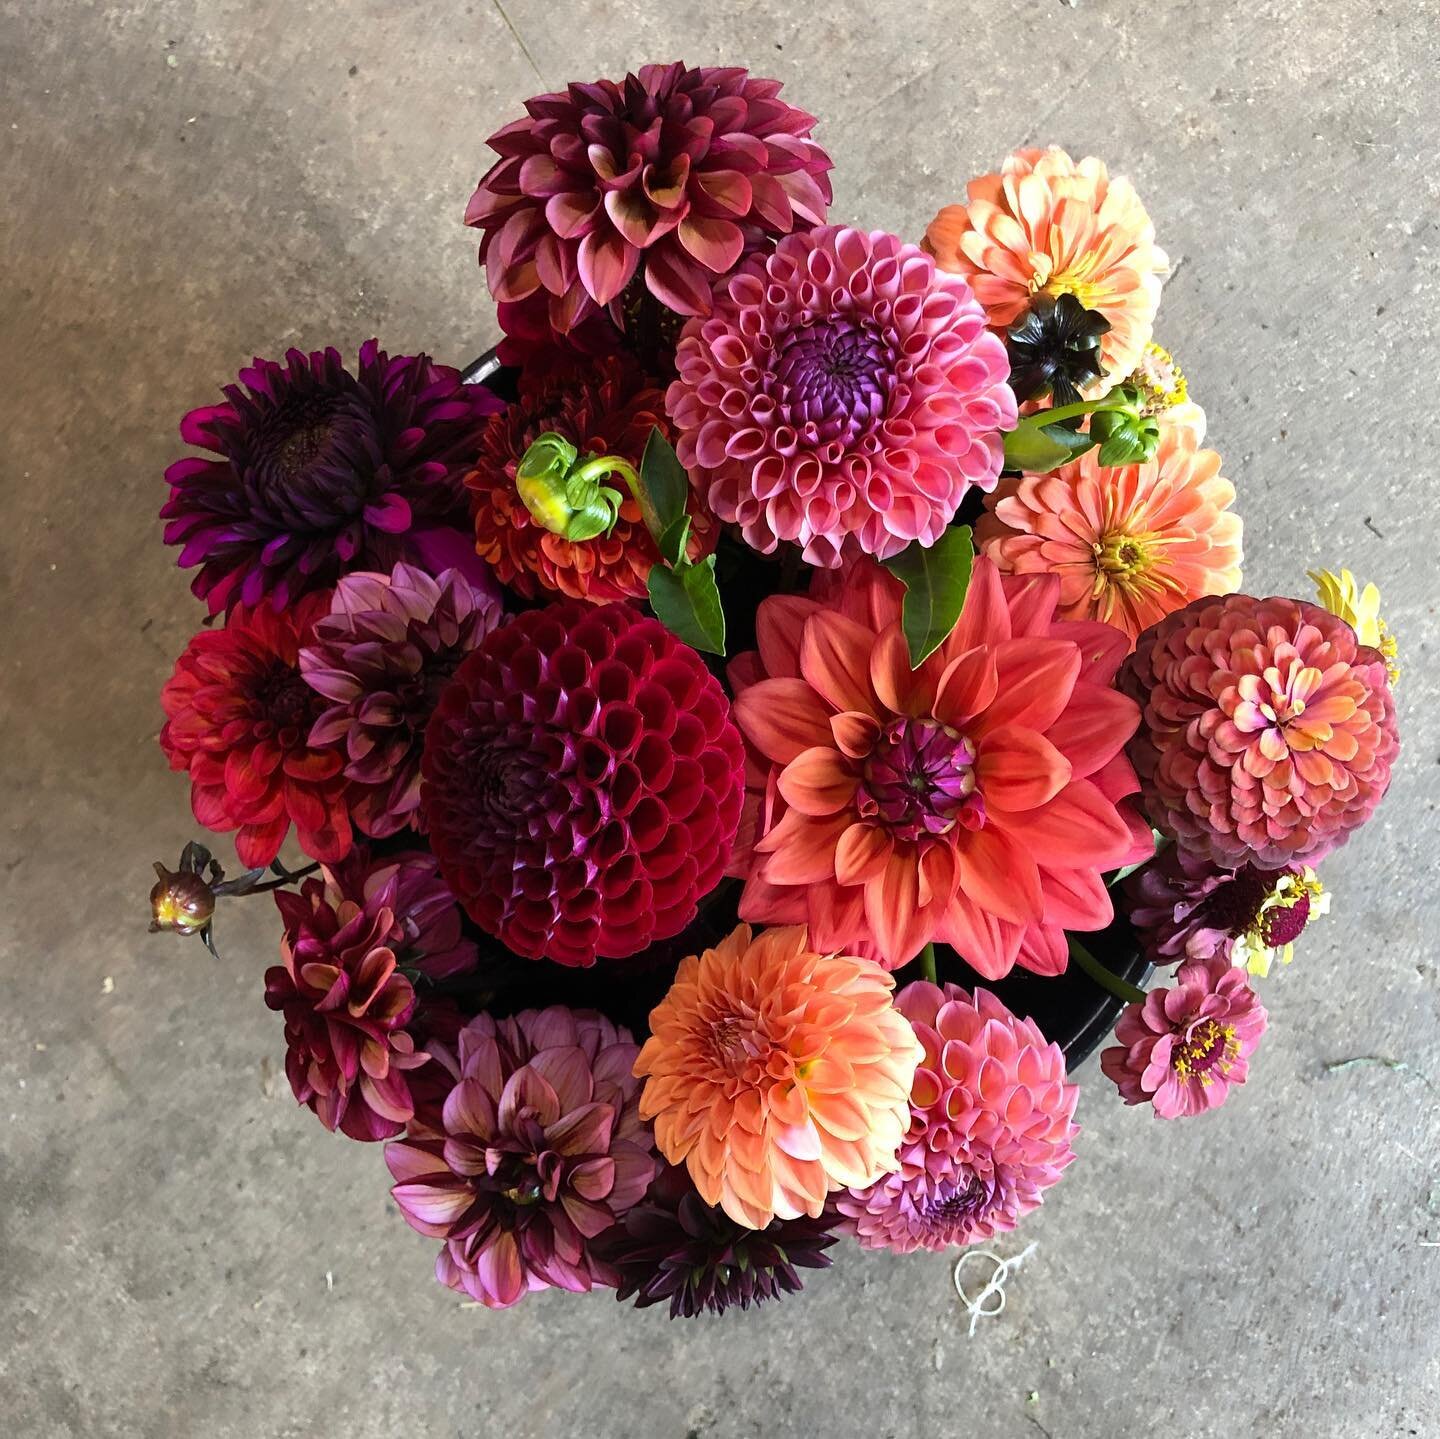 🧃 This juicy bucket of dahlia became a bridal bouquet like magic ✨🍇🍒🍓🍊🥭.
.
.
📸 dahlia varieties - Purple Flame, Seniors Hope, Babette, American Dawn, Peaches N Cream, &amp; Jowey Winnie. Some of our very favourite berry toned flowers from the 